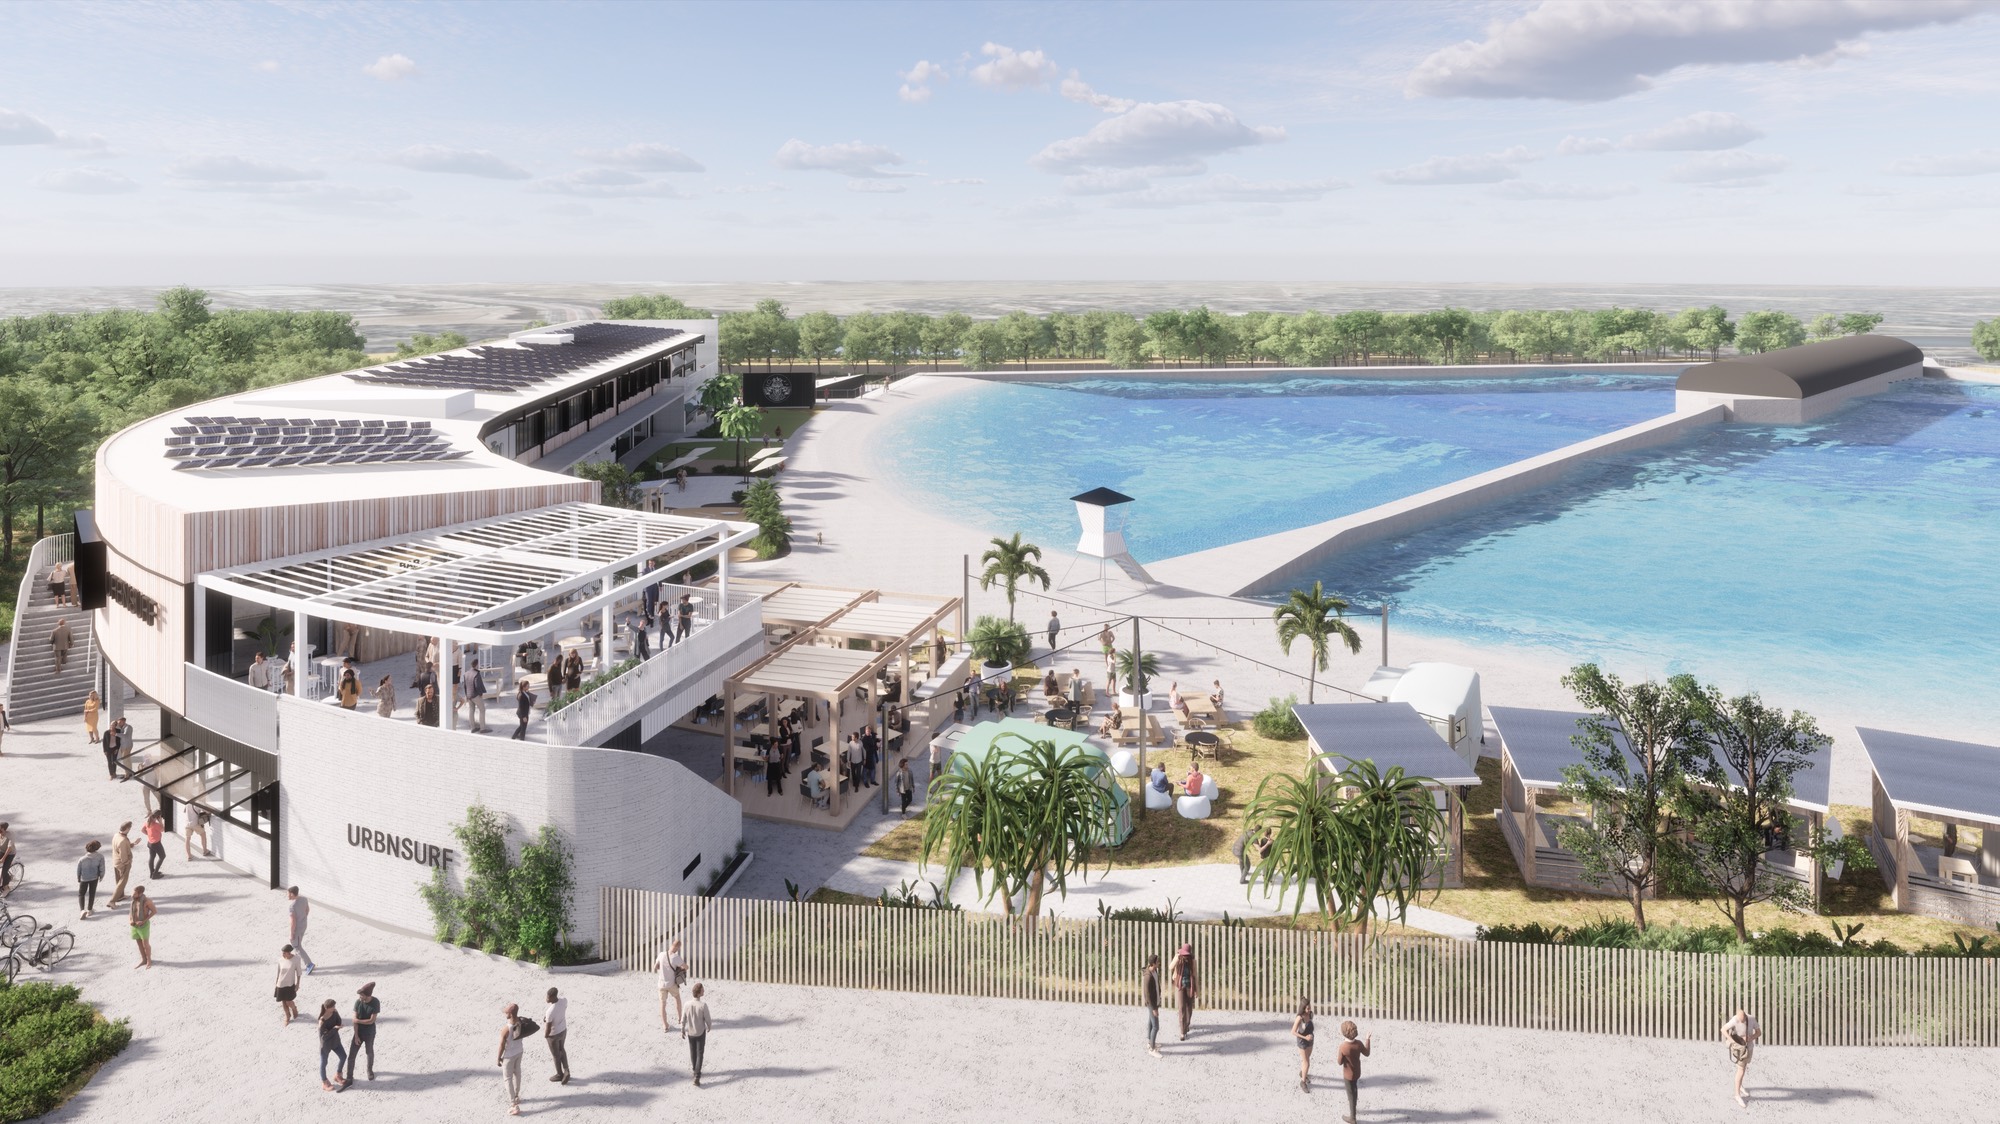 urbnsurf sydney expects to open in 2024